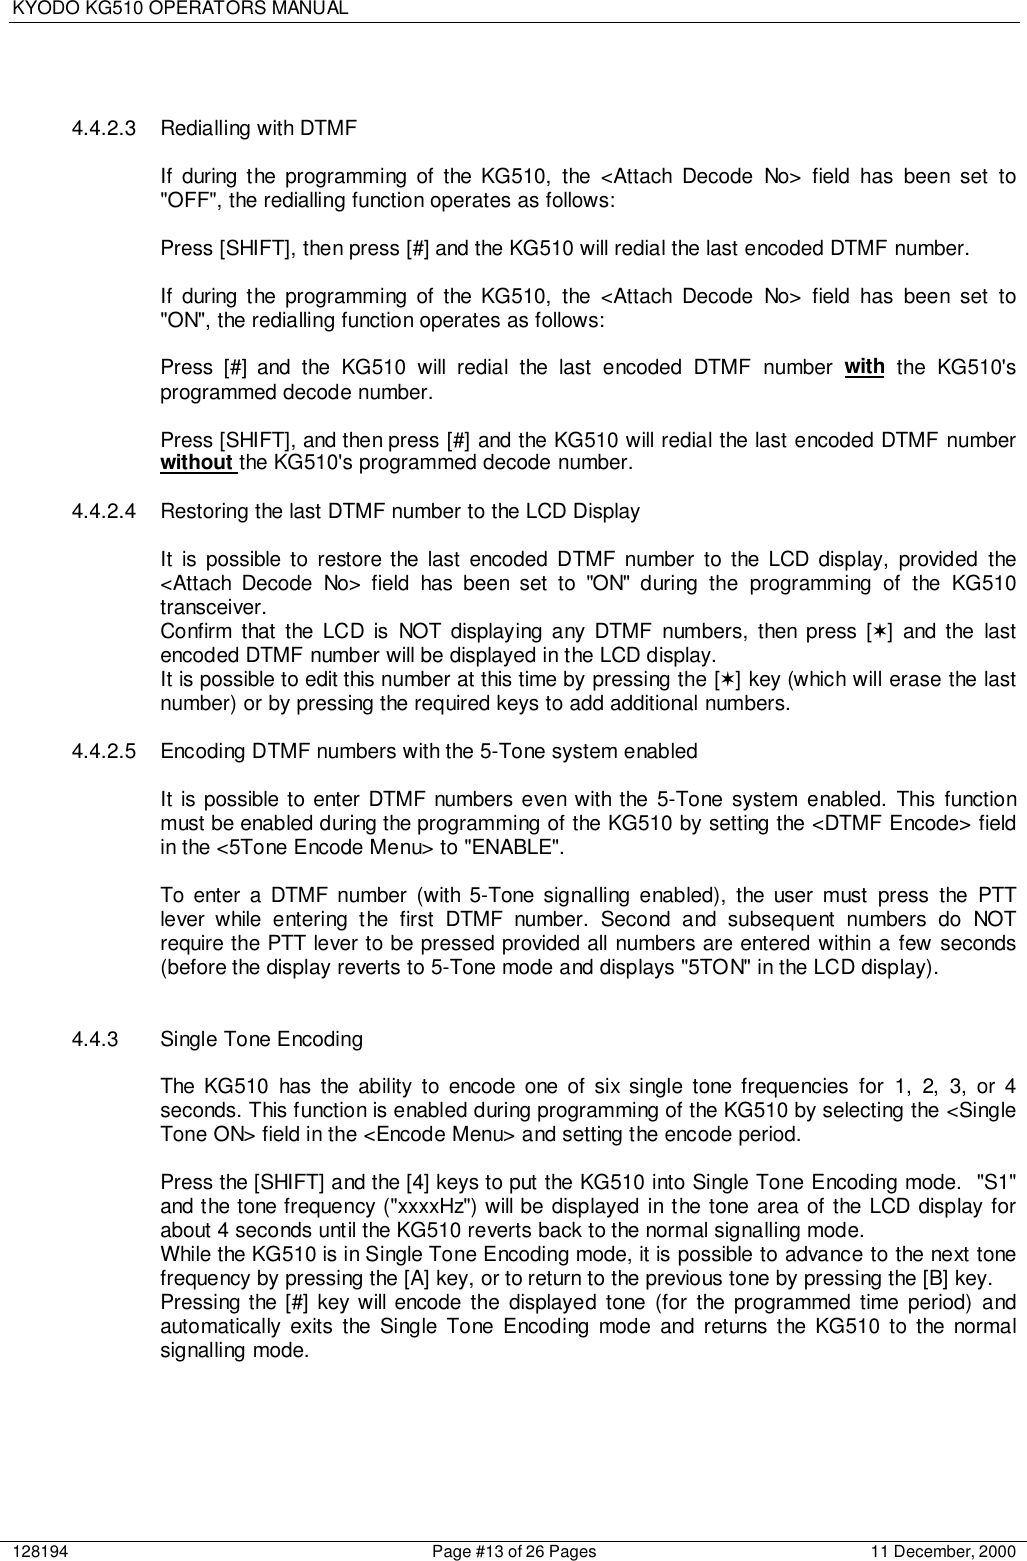 KYODO KG510 OPERATORS MANUAL128194 Page #13 of 26 Pages 11 December, 20004.4.2.3  Redialling with DTMFIf during the programming of the KG510, the &lt;Attach Decode No&gt; field has been set to&quot;OFF&quot;, the redialling function operates as follows:Press [SHIFT], then press [#] and the KG510 will redial the last encoded DTMF number.If during the programming of the KG510, the &lt;Attach Decode No&gt; field has been set to&quot;ON&quot;, the redialling function operates as follows:Press [#] and the KG510 will redial the last encoded DTMF number with the KG510&apos;sprogrammed decode number.Press [SHIFT], and then press [#] and the KG510 will redial the last encoded DTMF numberwithout the KG510&apos;s programmed decode number.4.4.2.4  Restoring the last DTMF number to the LCD DisplayIt is possible to restore the last encoded DTMF number to the LCD display, provided the&lt;Attach Decode No&gt; field has been set to &quot;ON&quot; during the programming of the KG510transceiver.Confirm that the LCD is NOT displaying any DTMF numbers, then press [✶] and the lastencoded DTMF number will be displayed in the LCD display.It is possible to edit this number at this time by pressing the [✶] key (which will erase the lastnumber) or by pressing the required keys to add additional numbers.4.4.2.5 Encoding DTMF numbers with the 5-Tone system enabledIt is possible to enter DTMF numbers even with the 5-Tone system enabled. This functionmust be enabled during the programming of the KG510 by setting the &lt;DTMF Encode&gt; fieldin the &lt;5Tone Encode Menu&gt; to &quot;ENABLE&quot;.To enter a DTMF number (with 5-Tone signalling enabled), the user must press the PTTlever while entering the first DTMF number. Second and subsequent numbers do NOTrequire the PTT lever to be pressed provided all numbers are entered within a few seconds(before the display reverts to 5-Tone mode and displays &quot;5TON&quot; in the LCD display).4.4.3 Single Tone EncodingThe KG510 has the ability to encode one of six single tone frequencies for 1, 2, 3, or 4seconds. This function is enabled during programming of the KG510 by selecting the &lt;SingleTone ON&gt; field in the &lt;Encode Menu&gt; and setting the encode period.Press the [SHIFT] and the [4] keys to put the KG510 into Single Tone Encoding mode.  &quot;S1&quot;and the tone frequency (&quot;xxxxHz&quot;) will be displayed in the tone area of the LCD display forabout 4 seconds until the KG510 reverts back to the normal signalling mode.While the KG510 is in Single Tone Encoding mode, it is possible to advance to the next tonefrequency by pressing the [A] key, or to return to the previous tone by pressing the [B] key.Pressing the [#] key will encode the displayed tone (for the programmed time period) andautomatically exits the Single Tone Encoding mode and returns the KG510 to the normalsignalling mode.